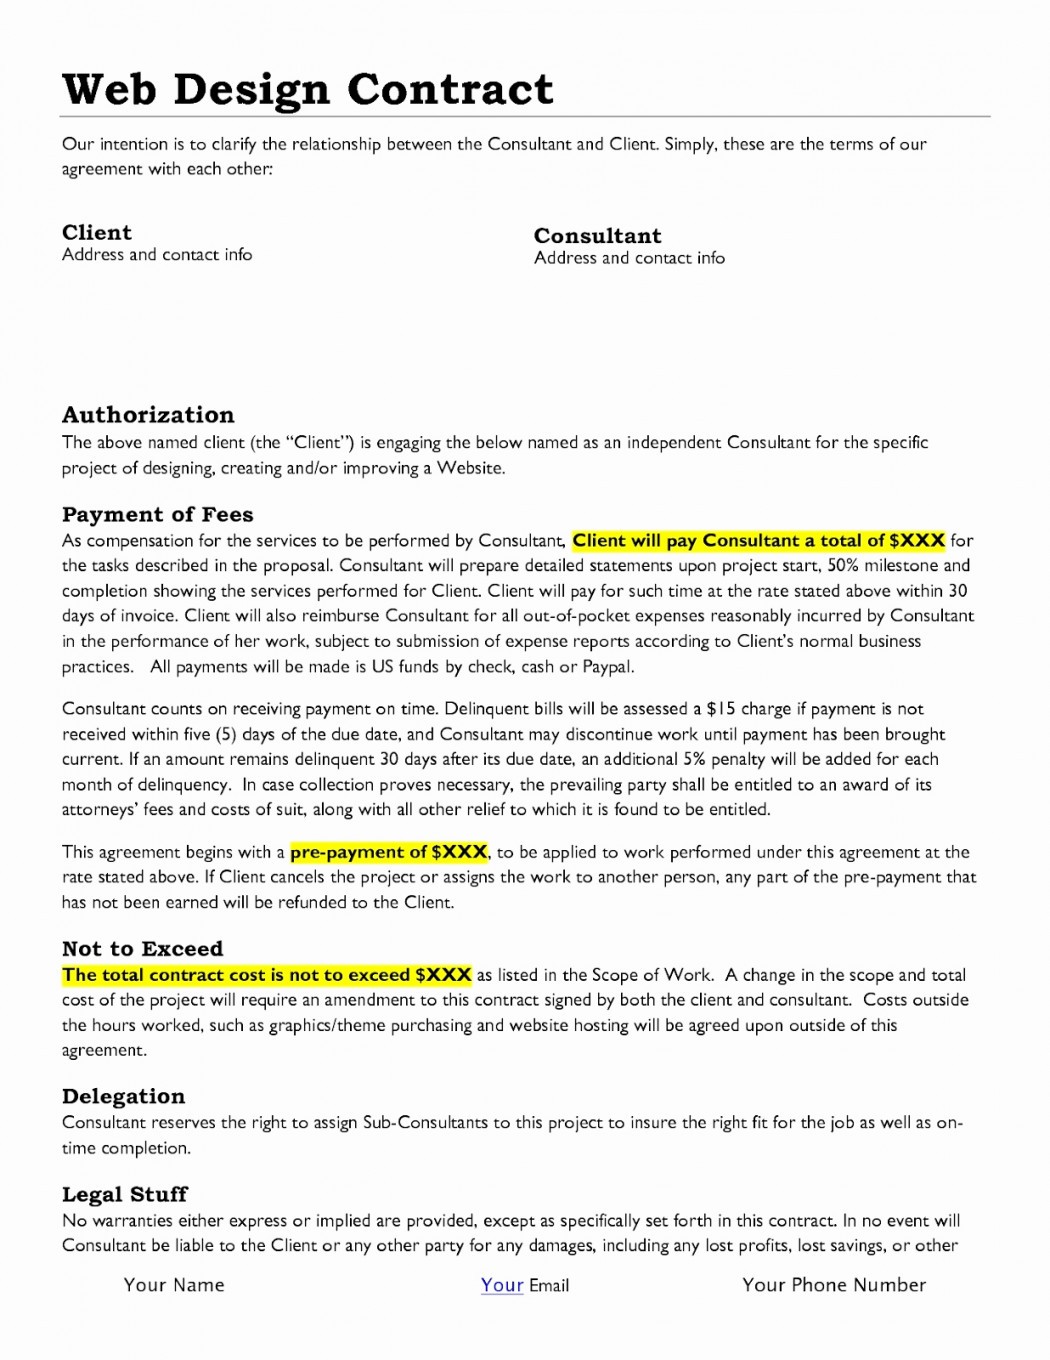 Web Design Agreement Template Lostranquillos Document Webdesign Contract